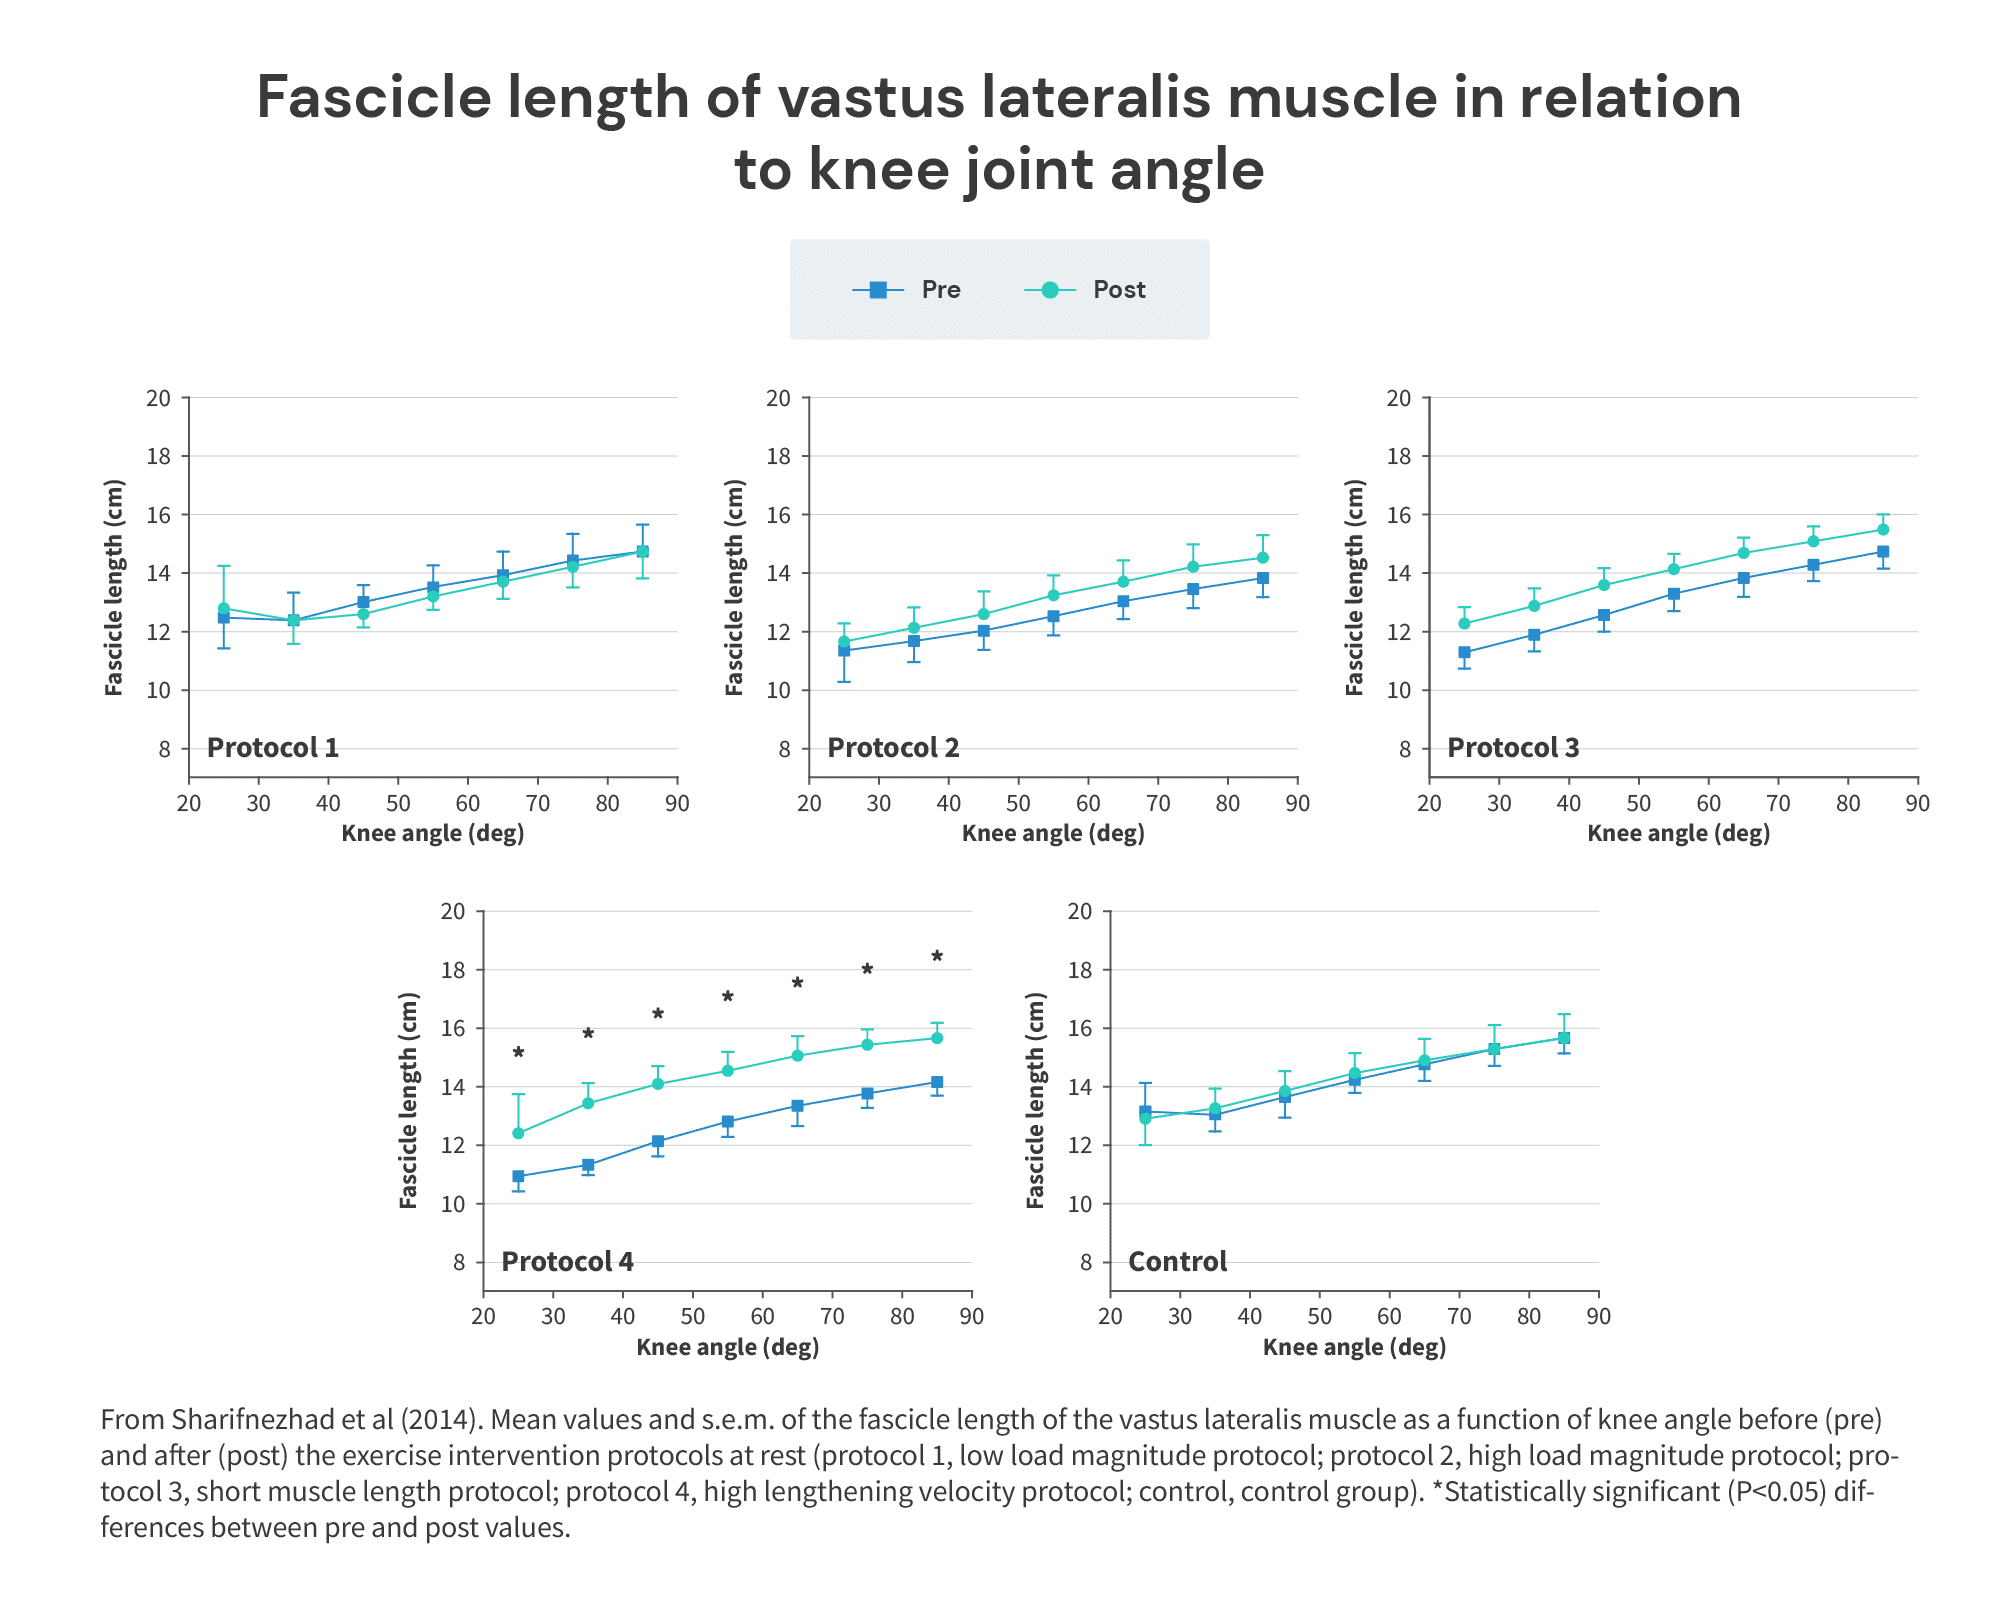 Fascicle length of vastus lateralis muscle in relation to knee joint angle 